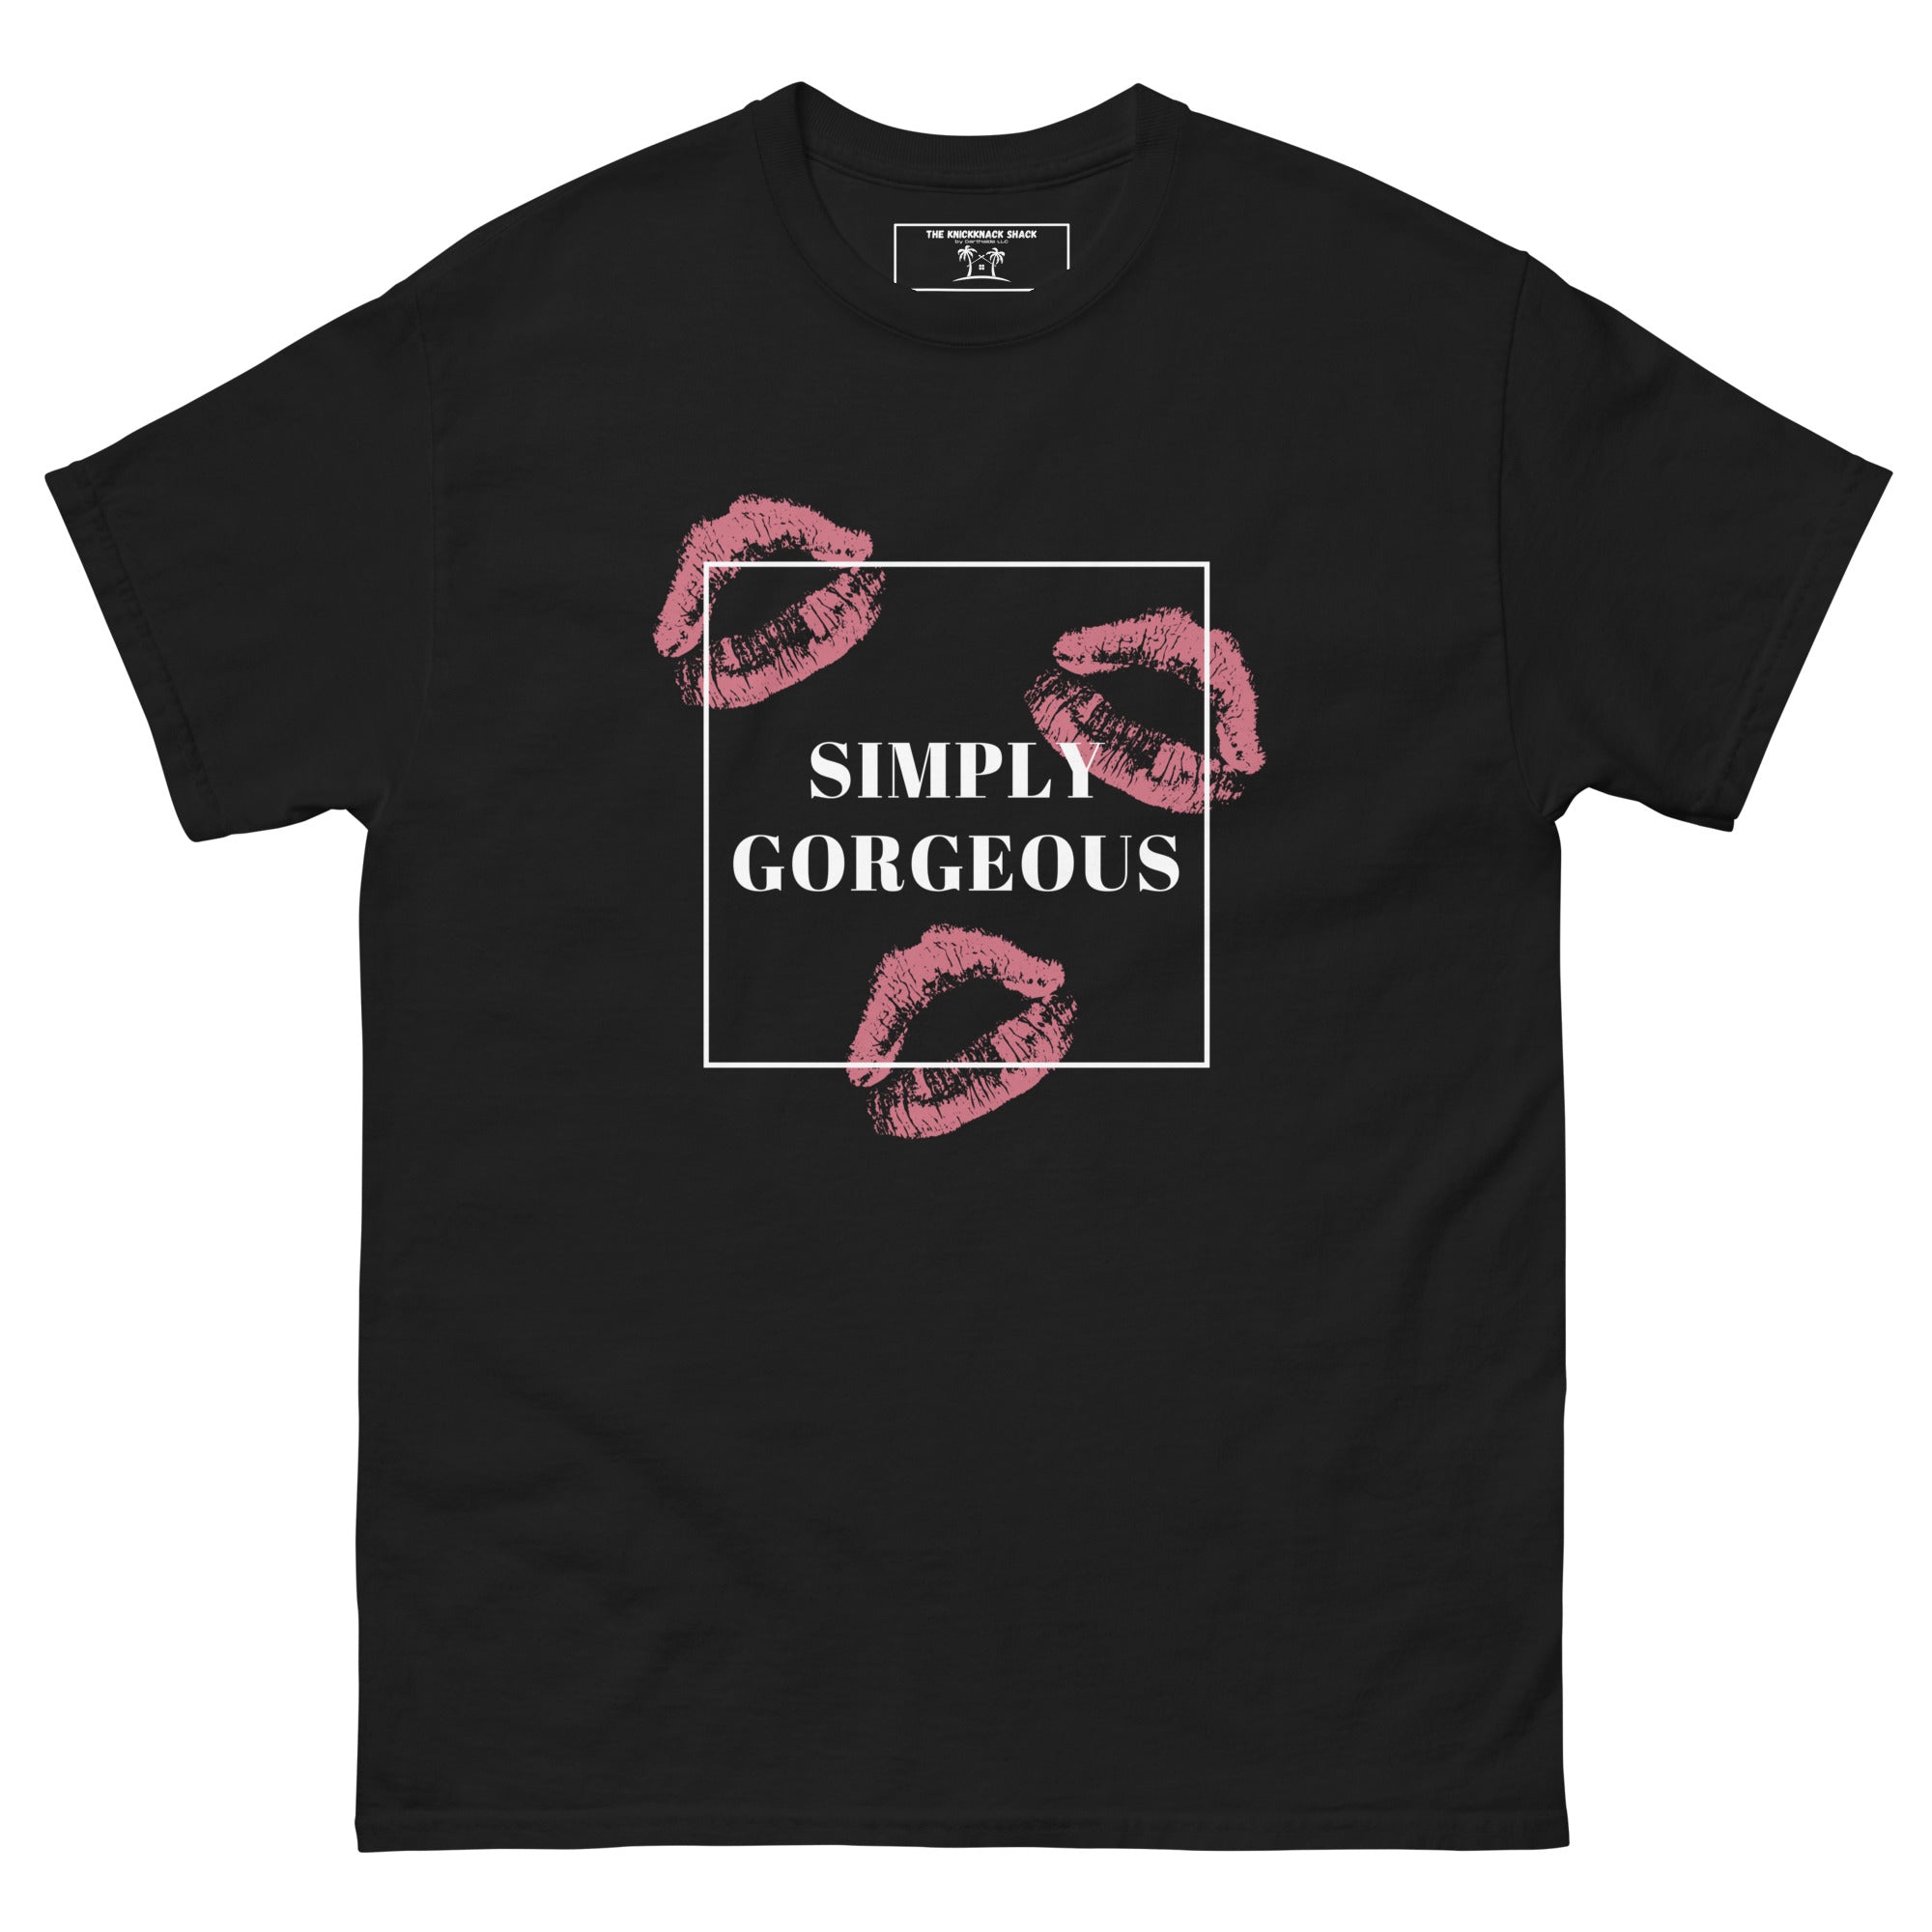 Classic Tee - Simply Gorgeous (Dark Colors)